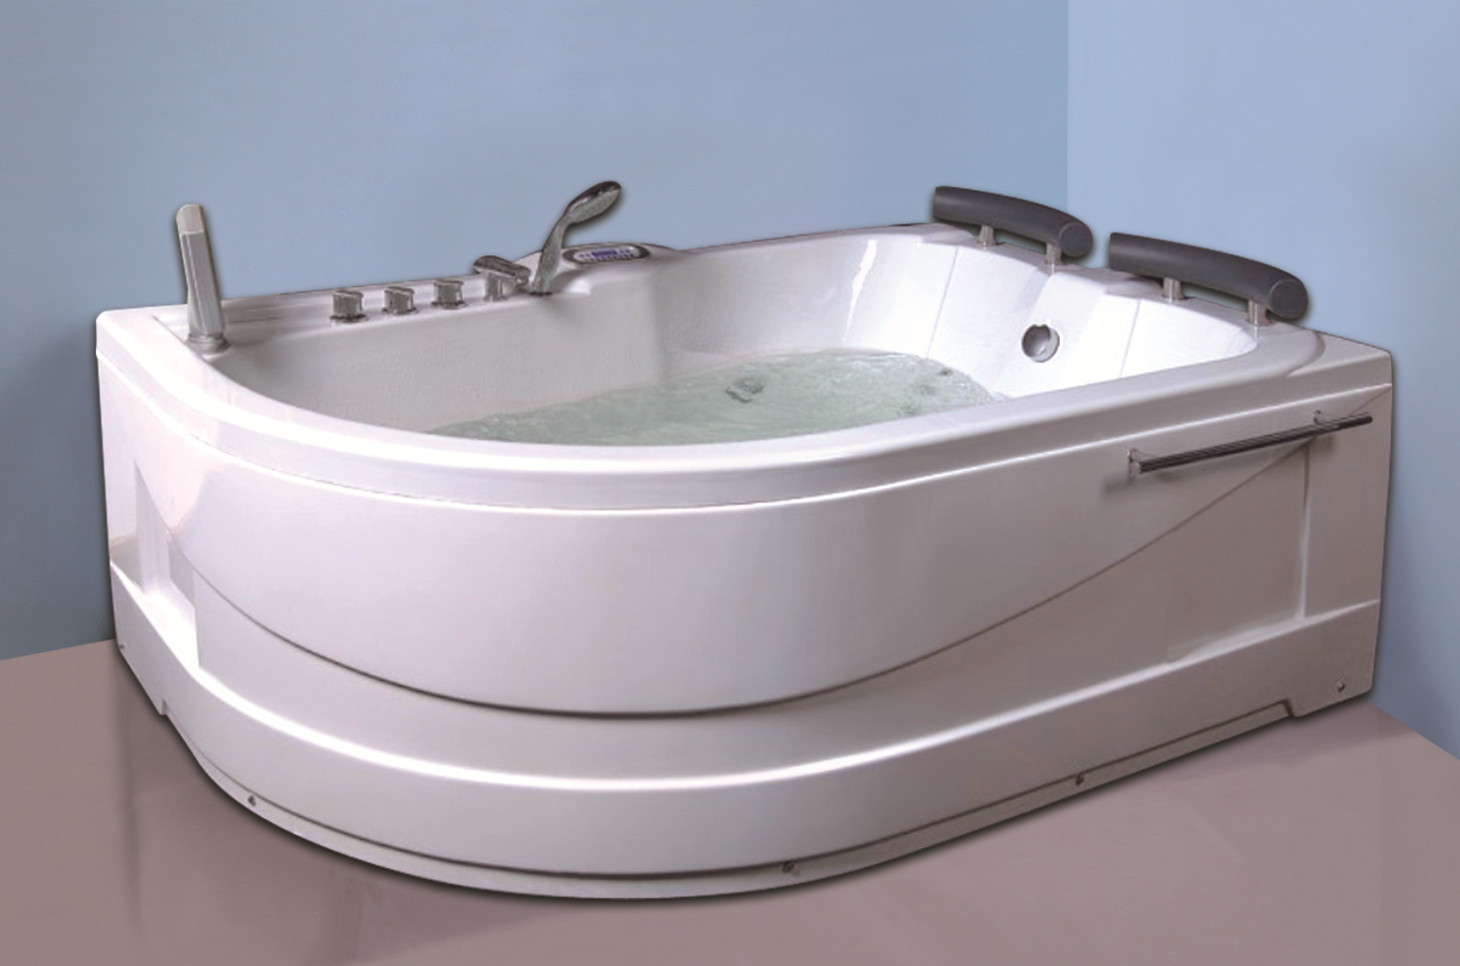 Jacuzzi Tub Indoor Handle Shower Included, 2 Person Jacuzzi Bathtub